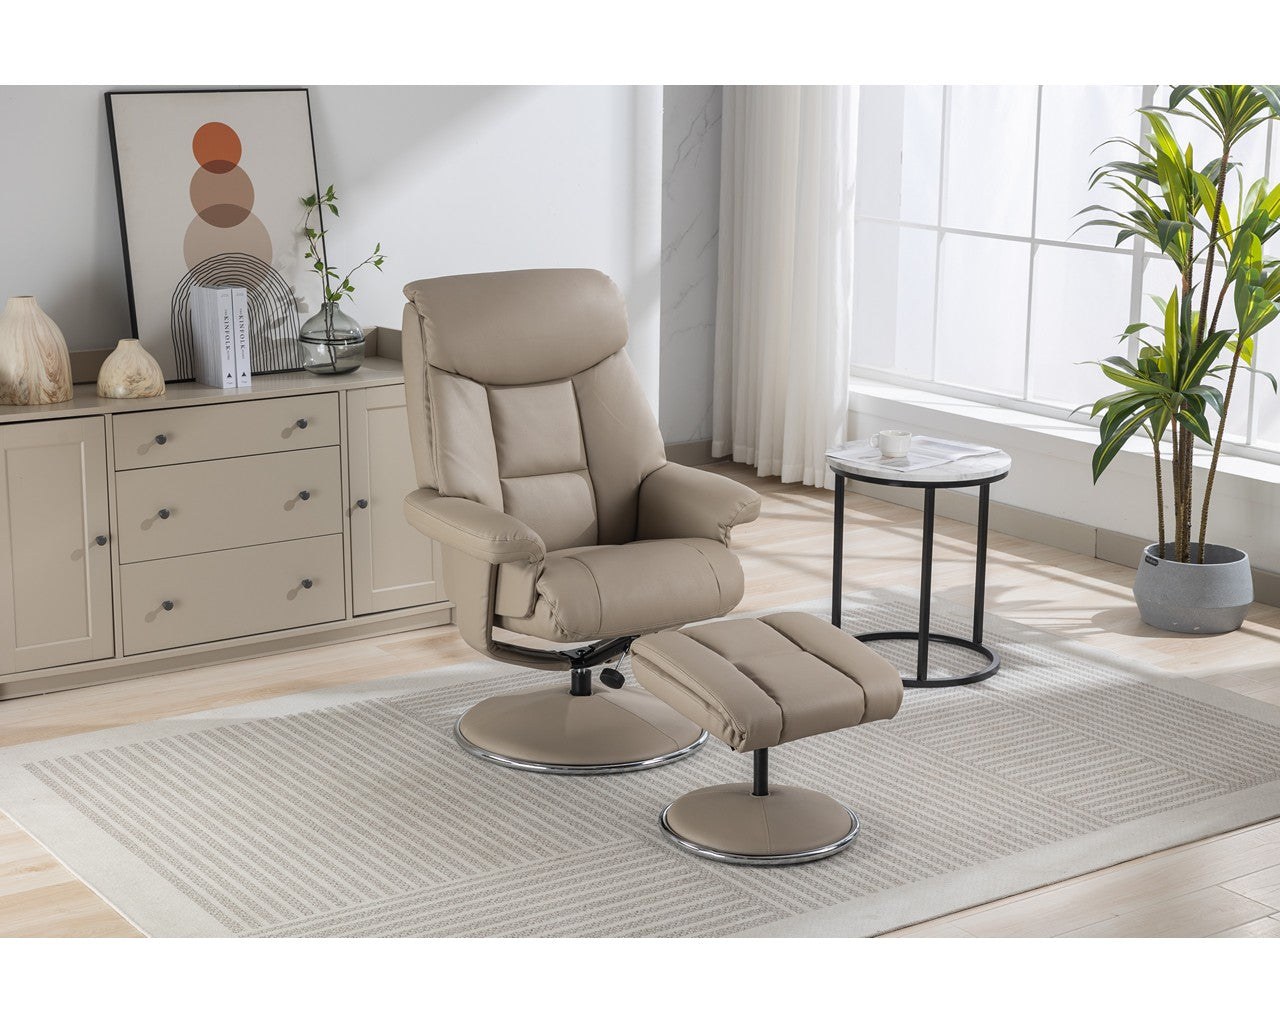 Swivel Recliner Chair Collection - Biarritz: Pebble Plush